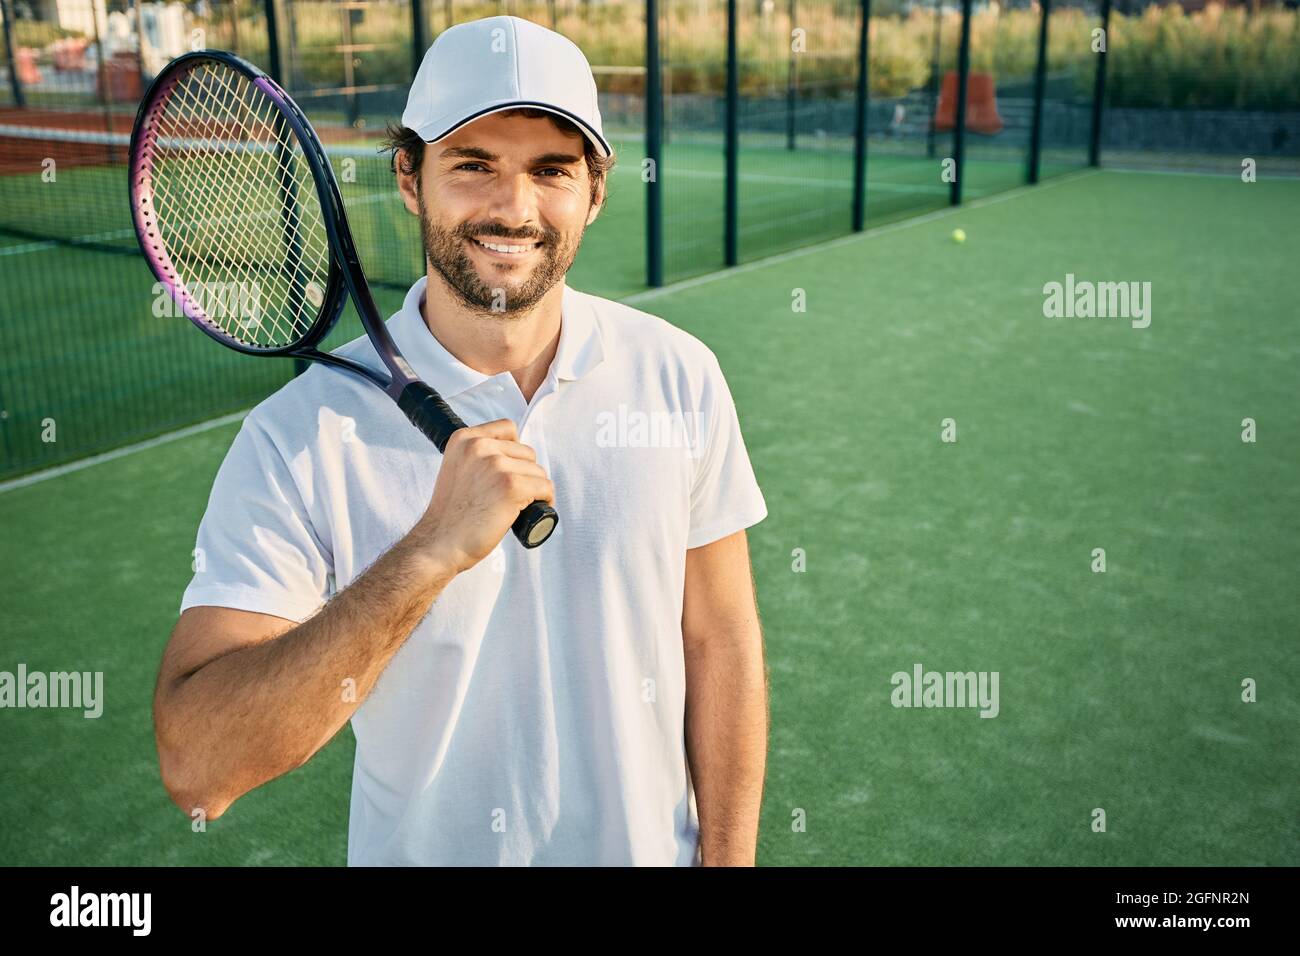 Portrait of a handsome tennis player with a racket in hand standing on a  tennis court wearing a white uniform Stock Photo - Alamy